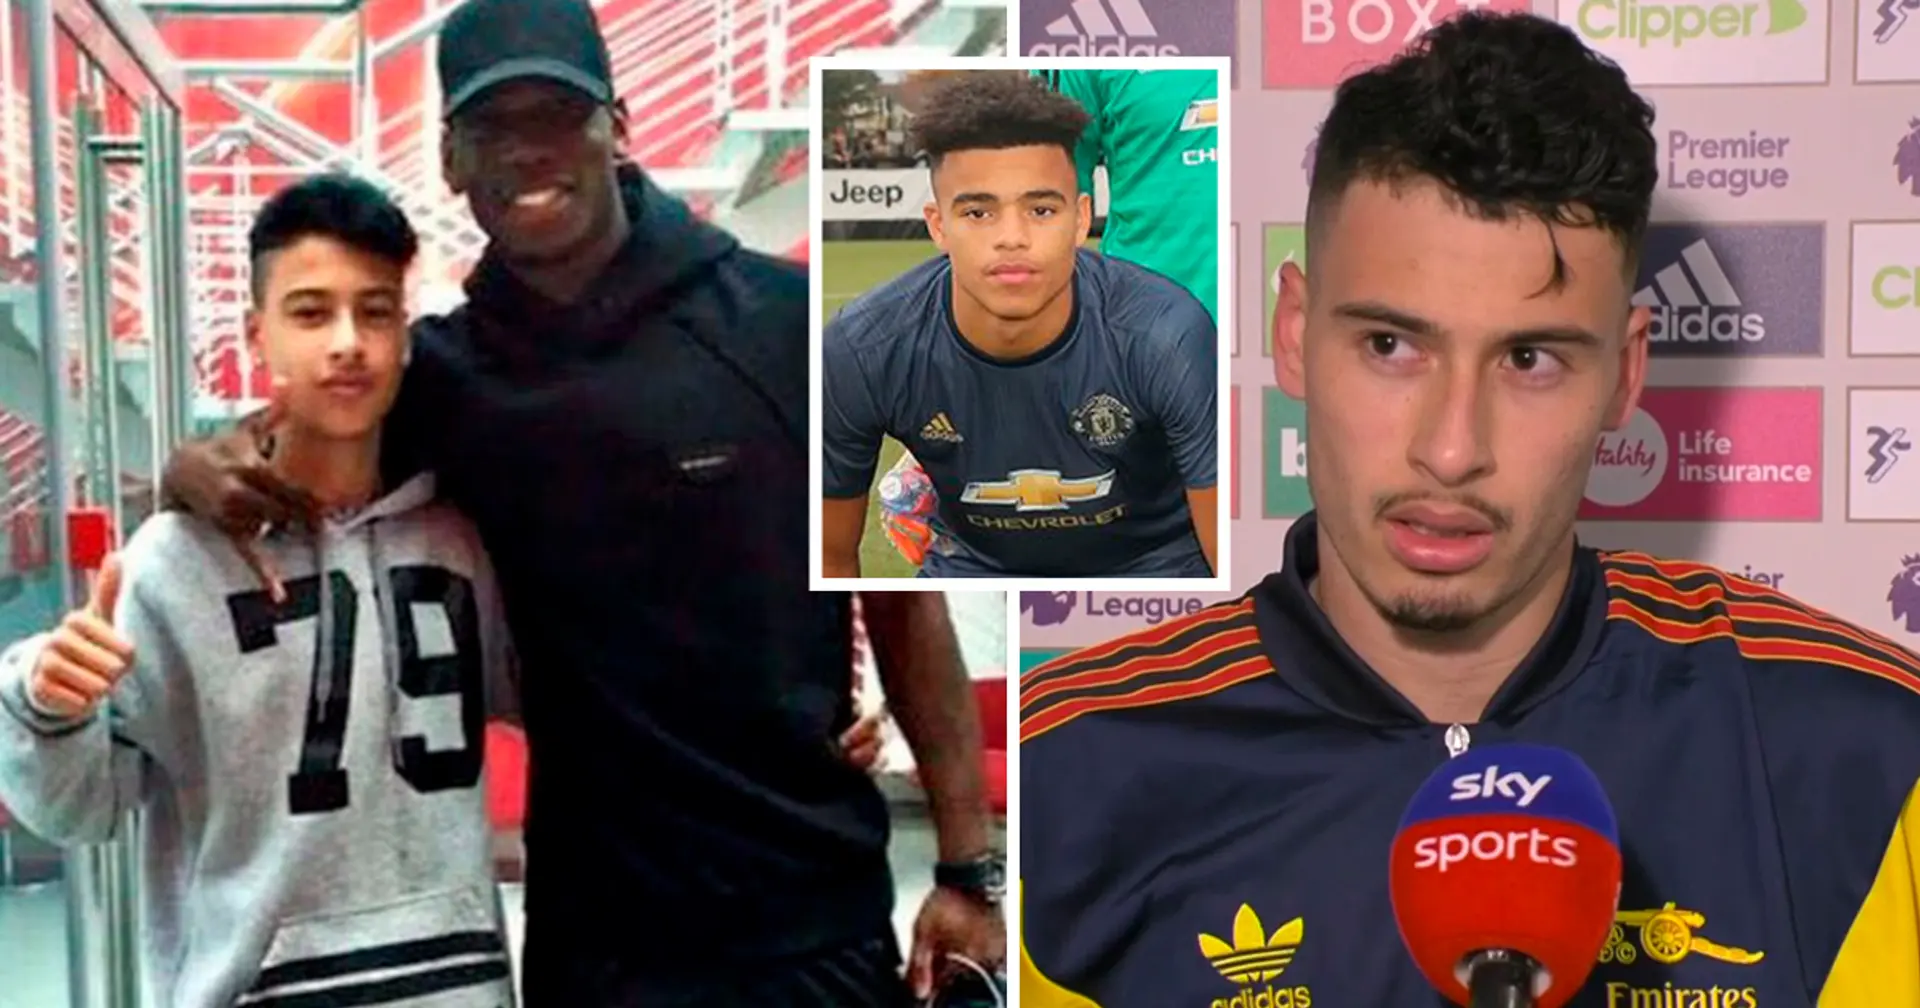 'I played in the same age group as Greenwood': Gabriel Martinelli opens up on his FOUR failed trials at Man United